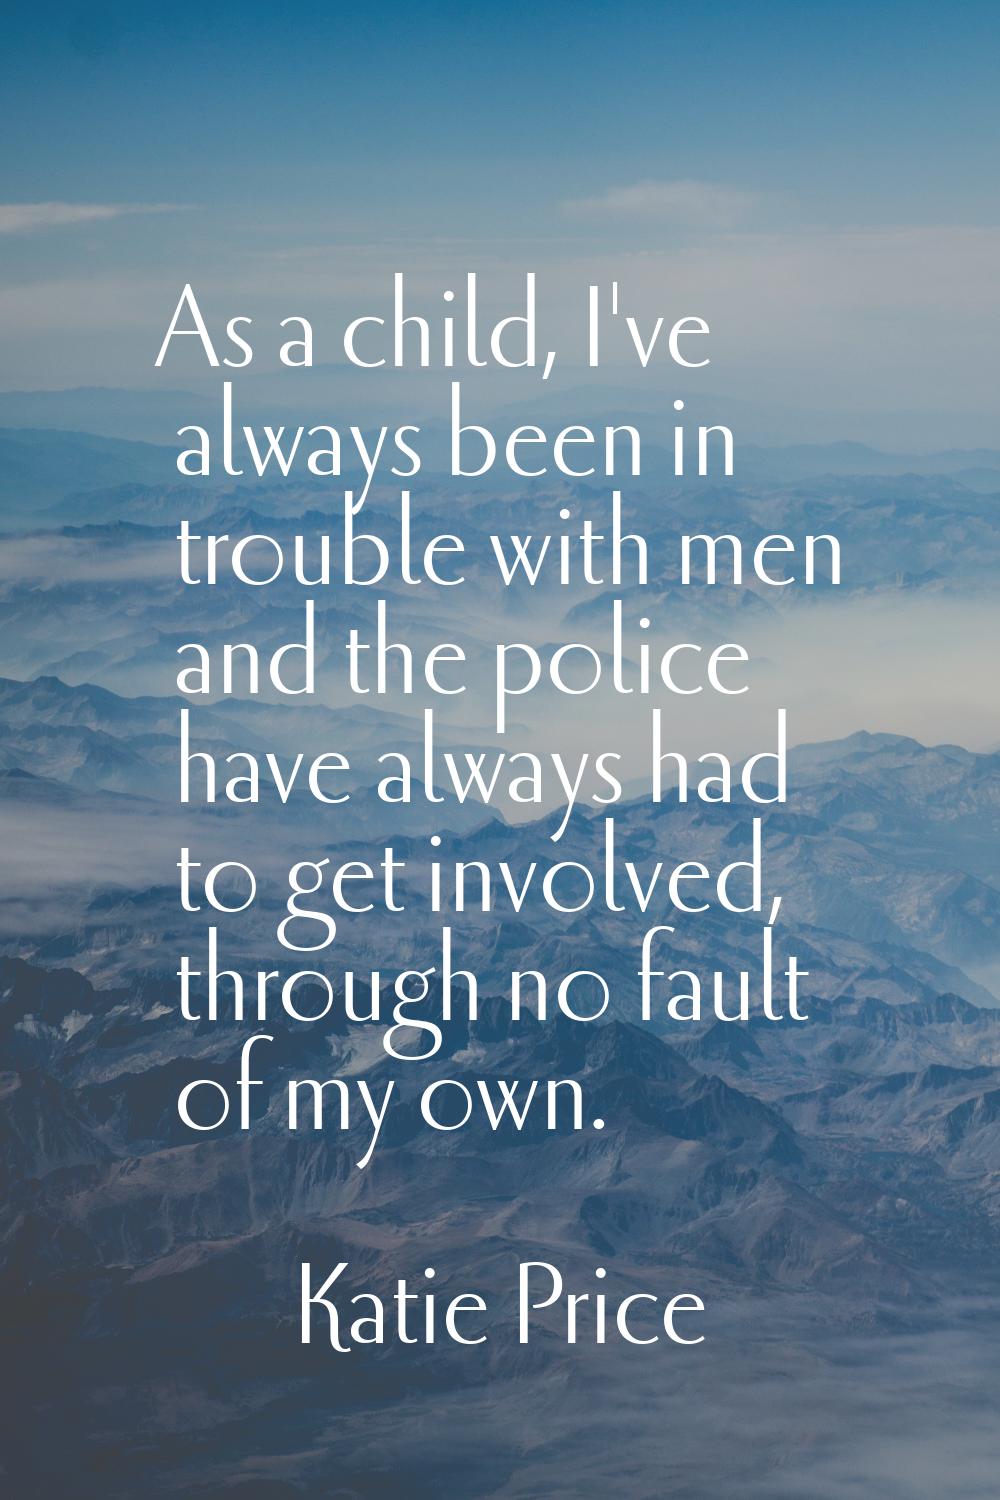 As a child, I've always been in trouble with men and the police have always had to get involved, th